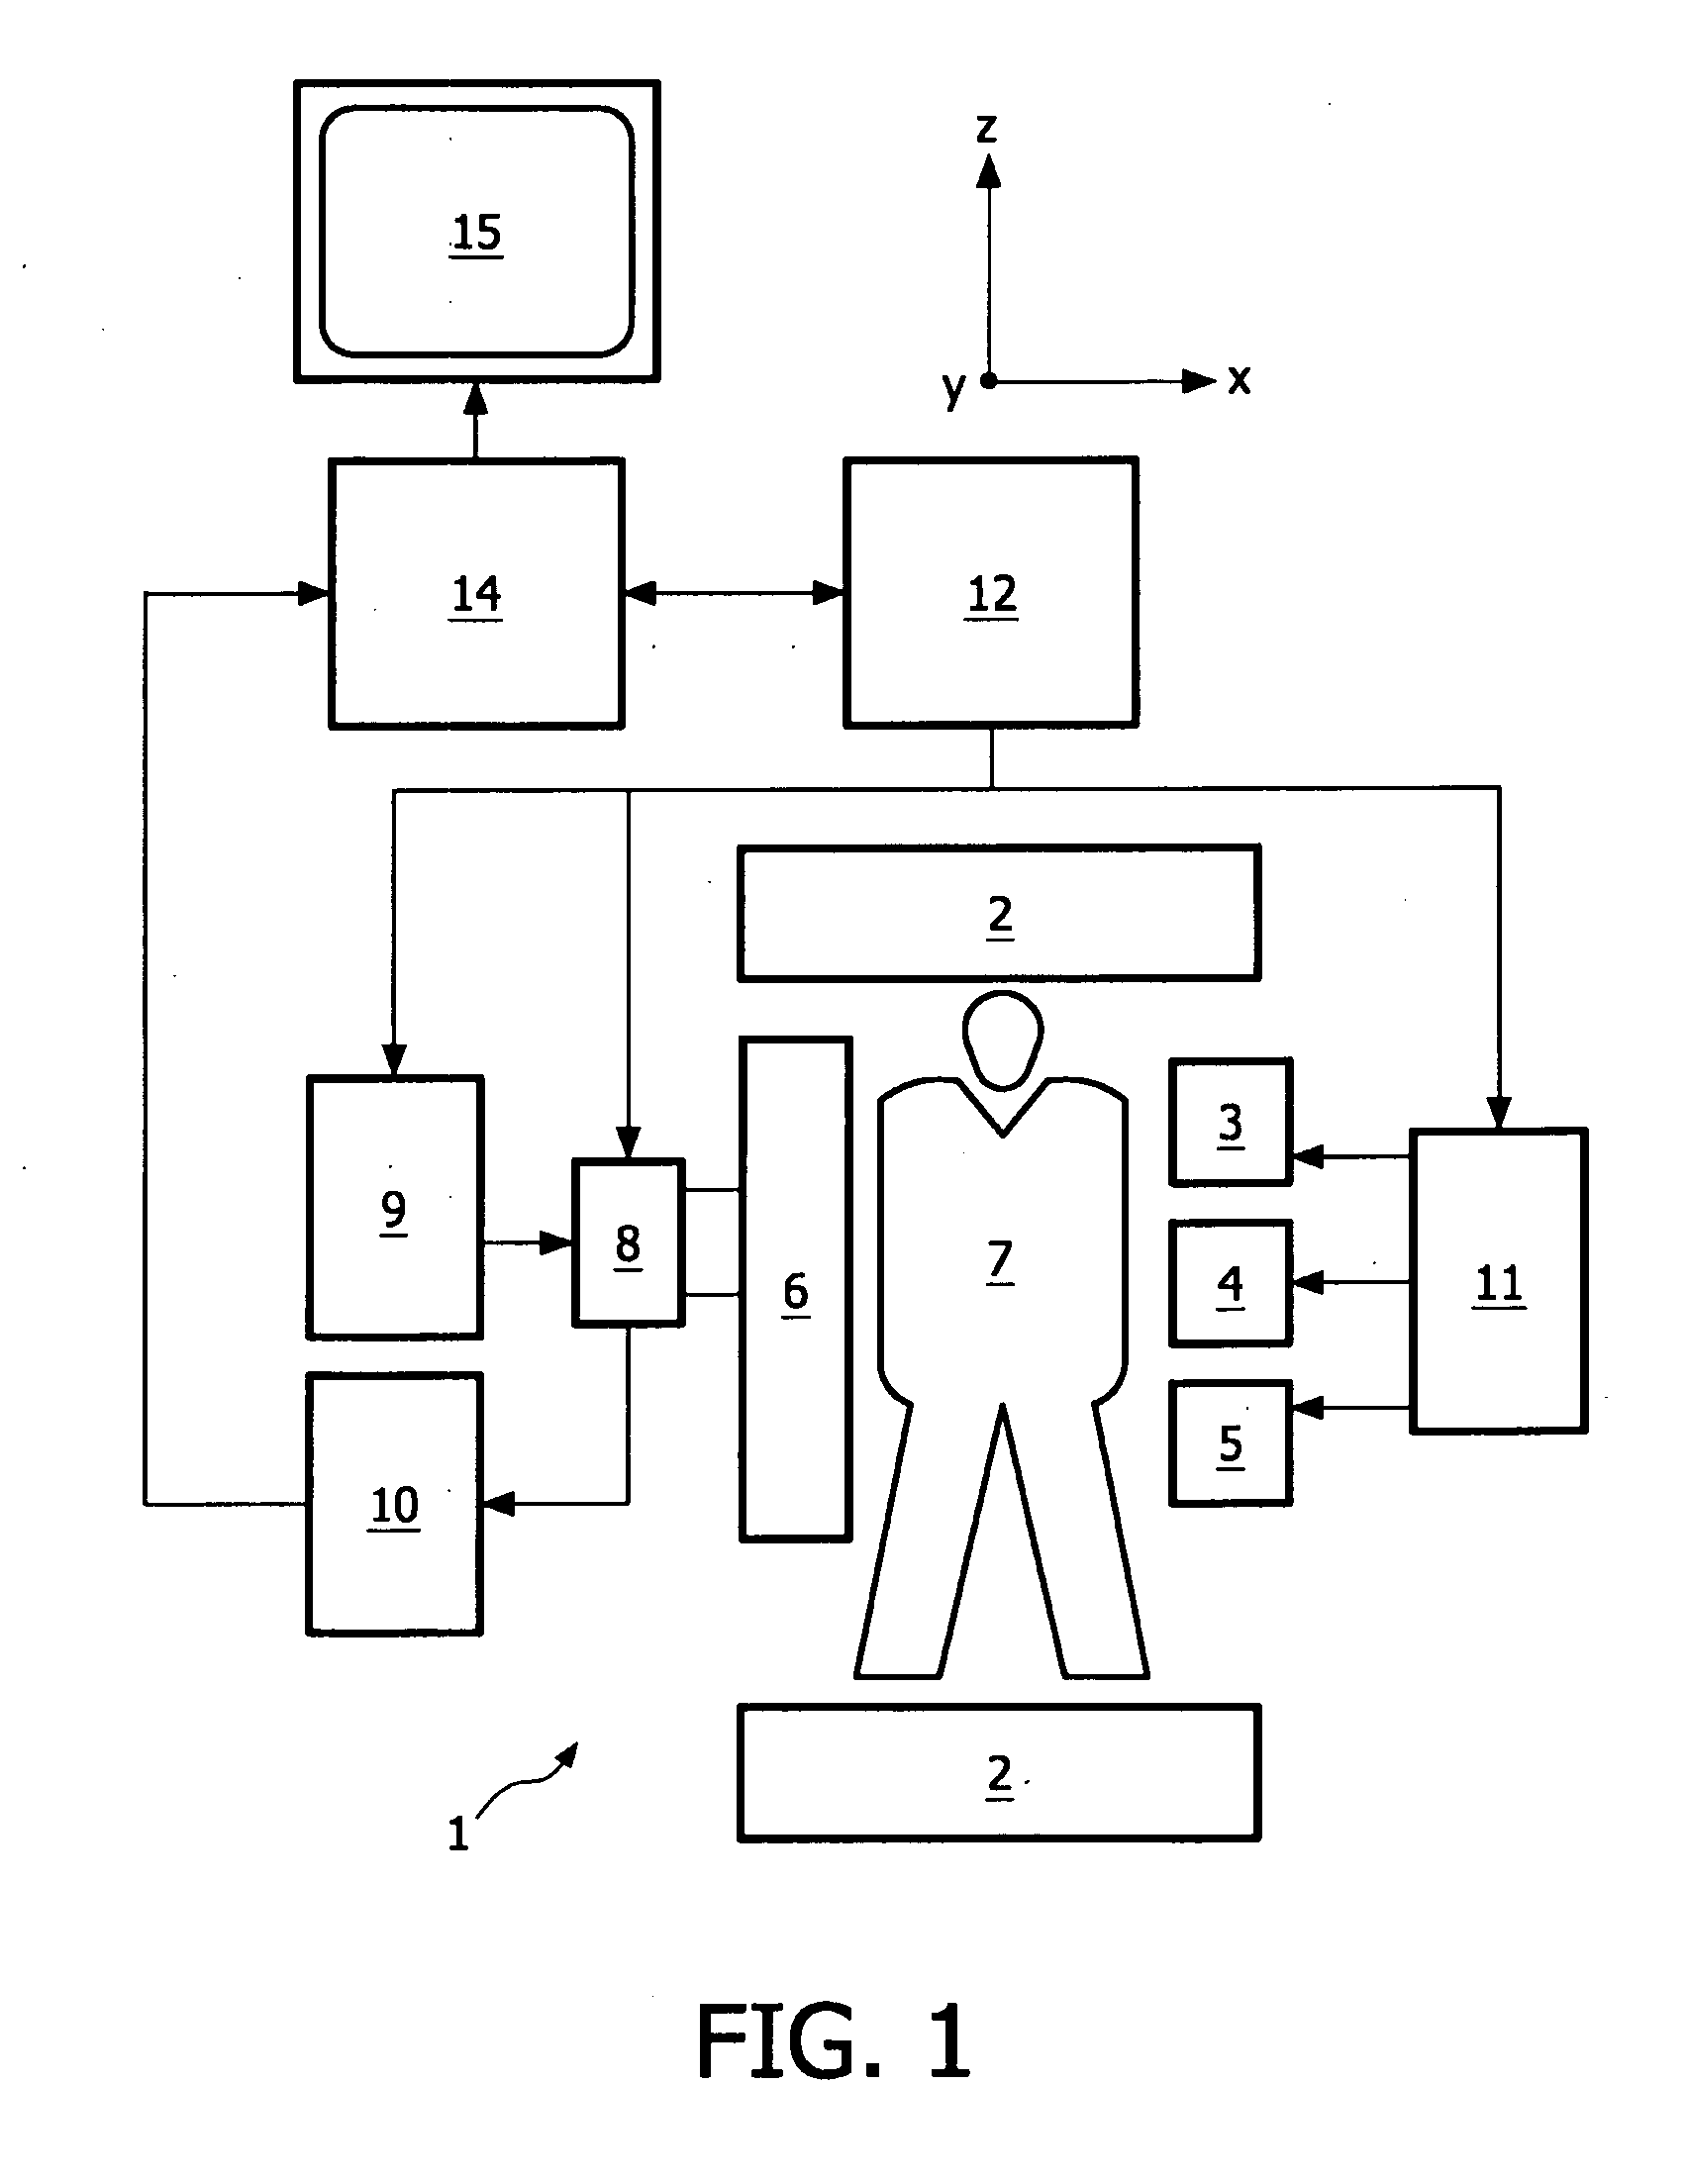 MRI involving dynamic profile sharing such as keyhole and motion correction